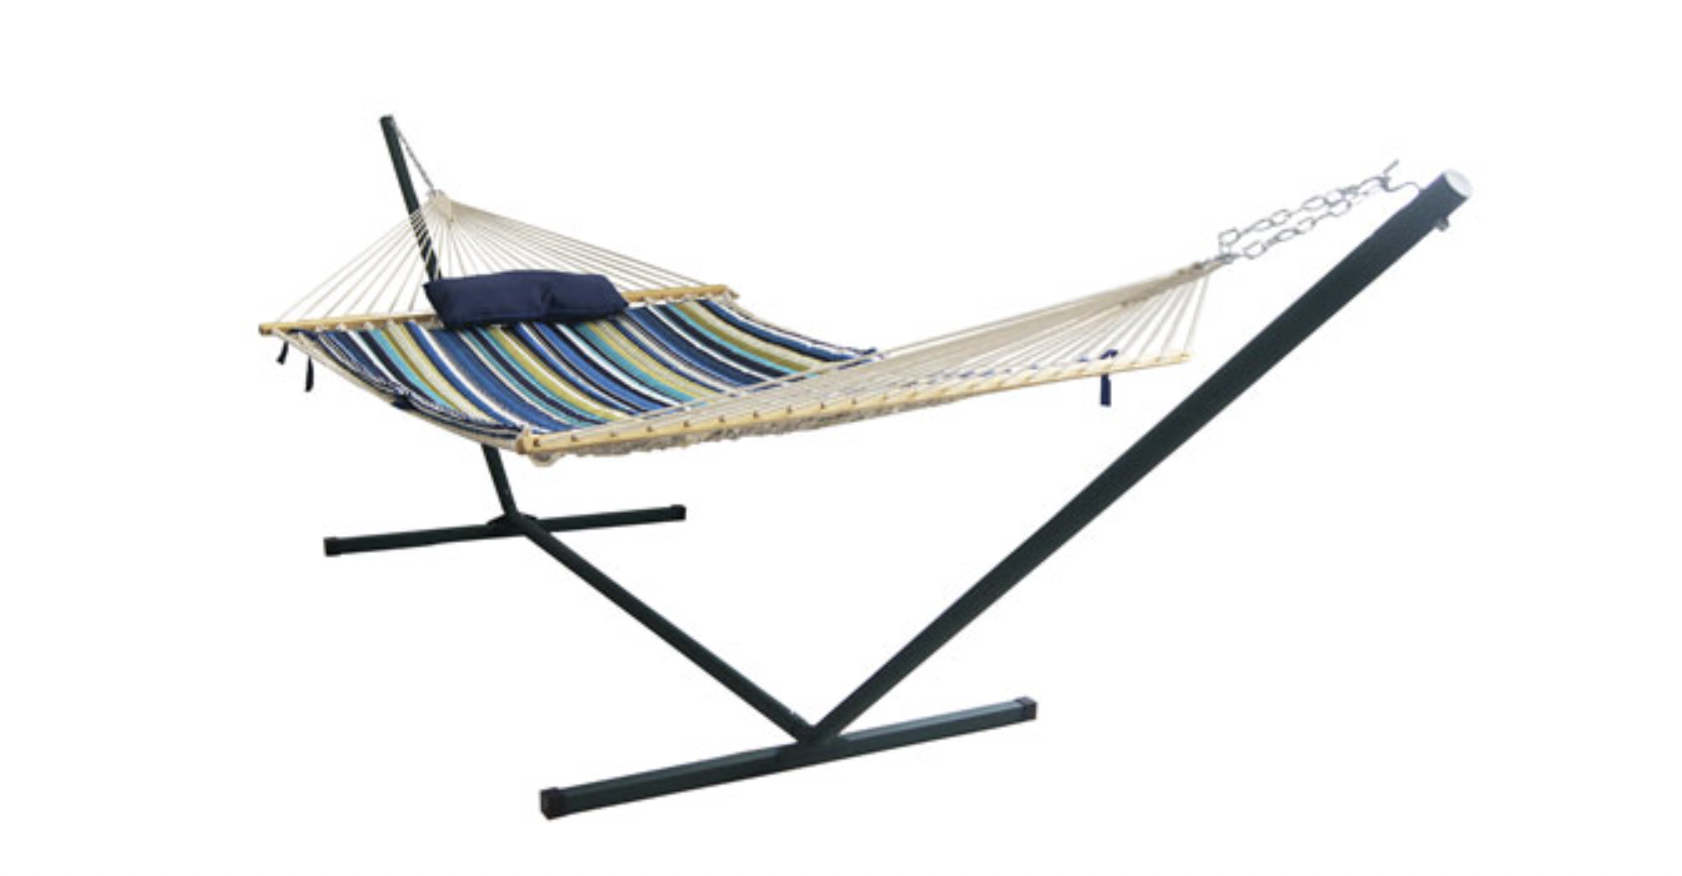 freestanding hammock on a metal stand